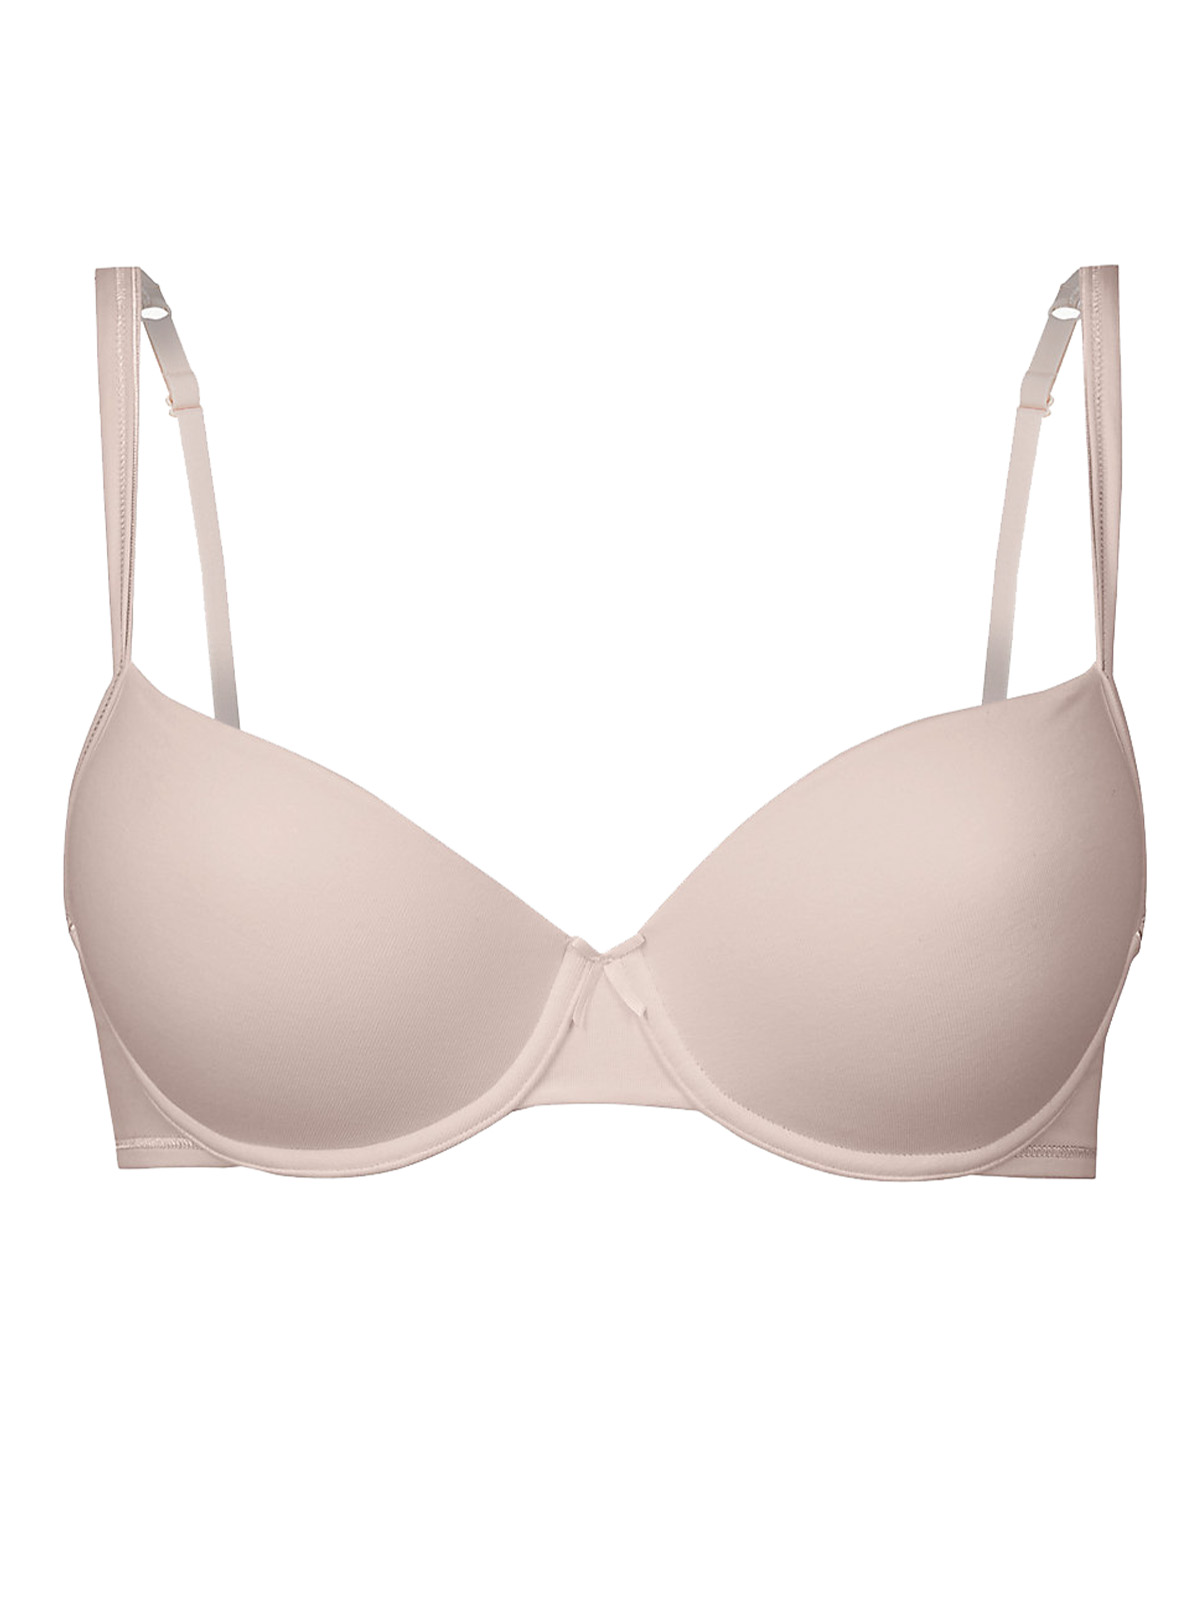 Marks and Spencer - - M&5 ASSORTED Padded Bras - Size 32 to 38 (B-C-D-DD)